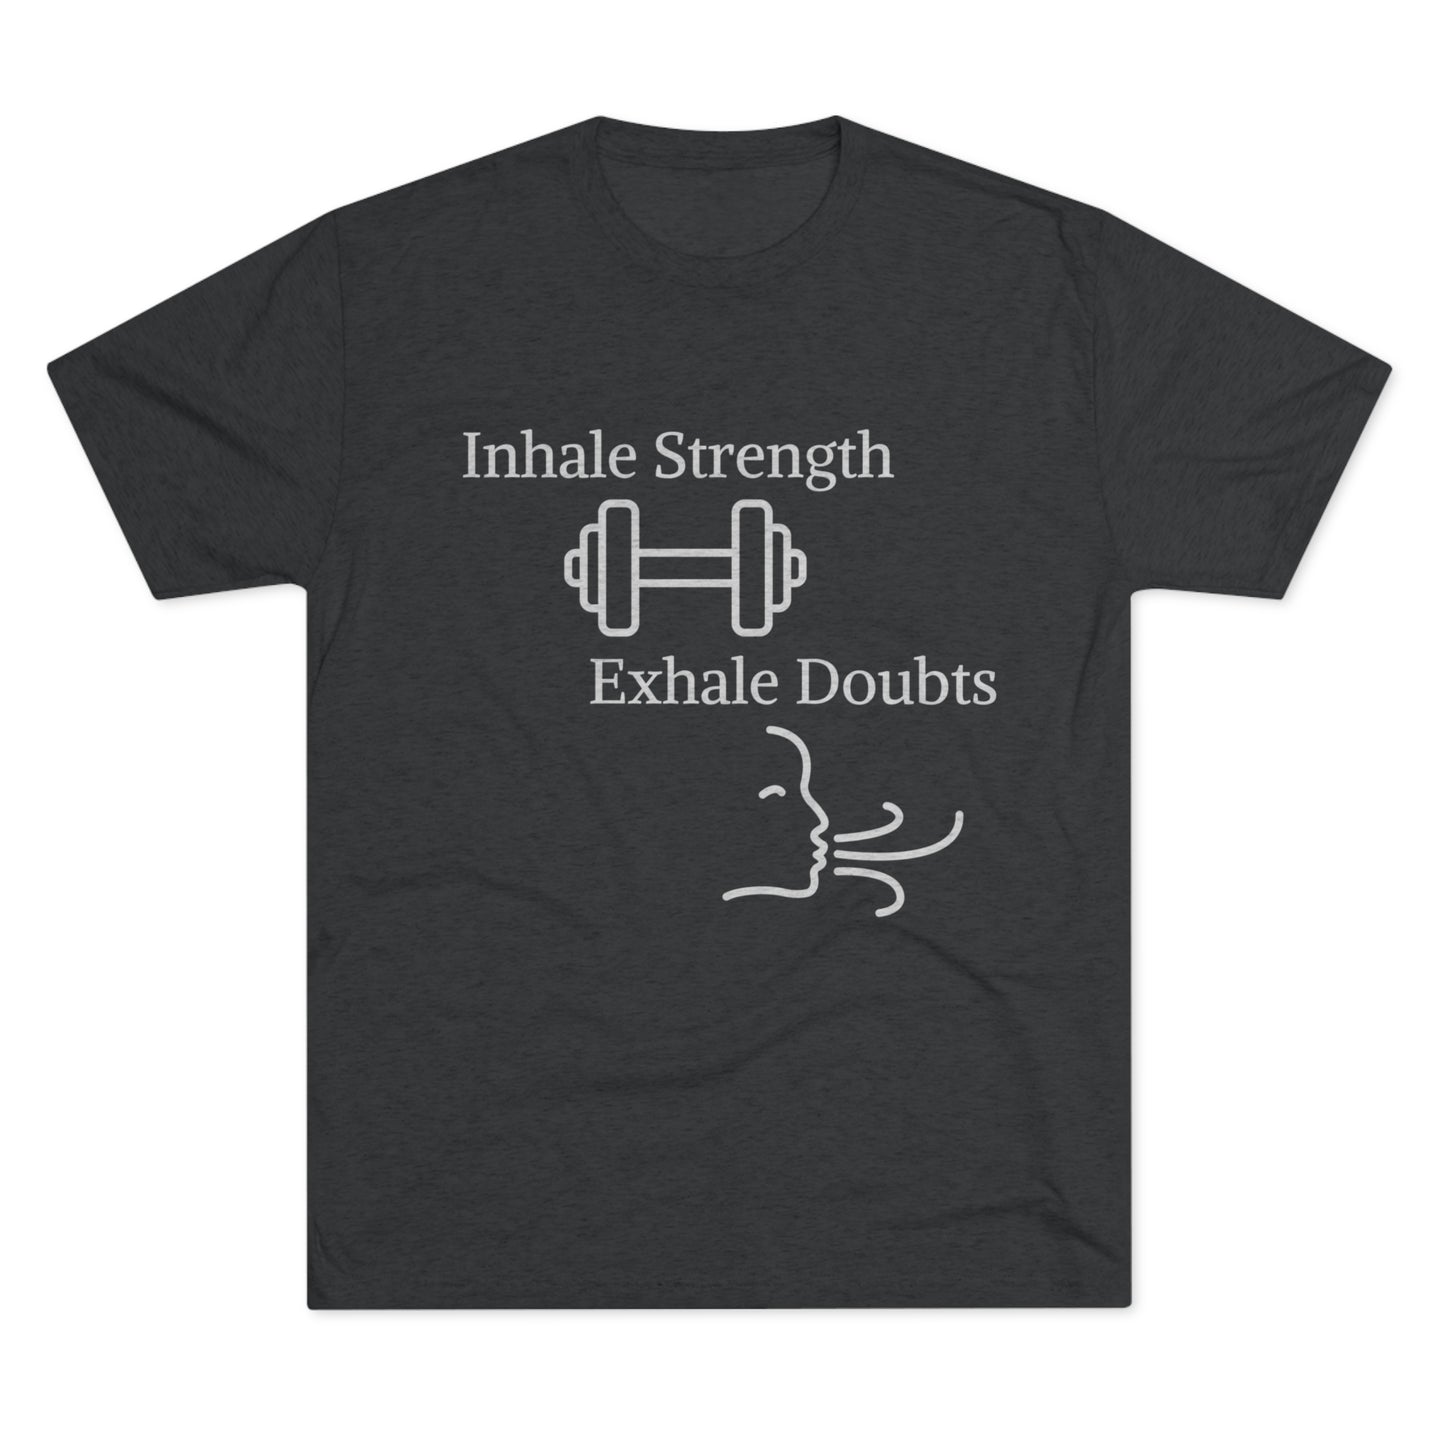 A dark gray Printify t-shirt with white text reading "Inhale Strength Exhale Doubt" and a graphic of a dumbbell above the text, with an abstract design of exhaling below. Perfect as motivational